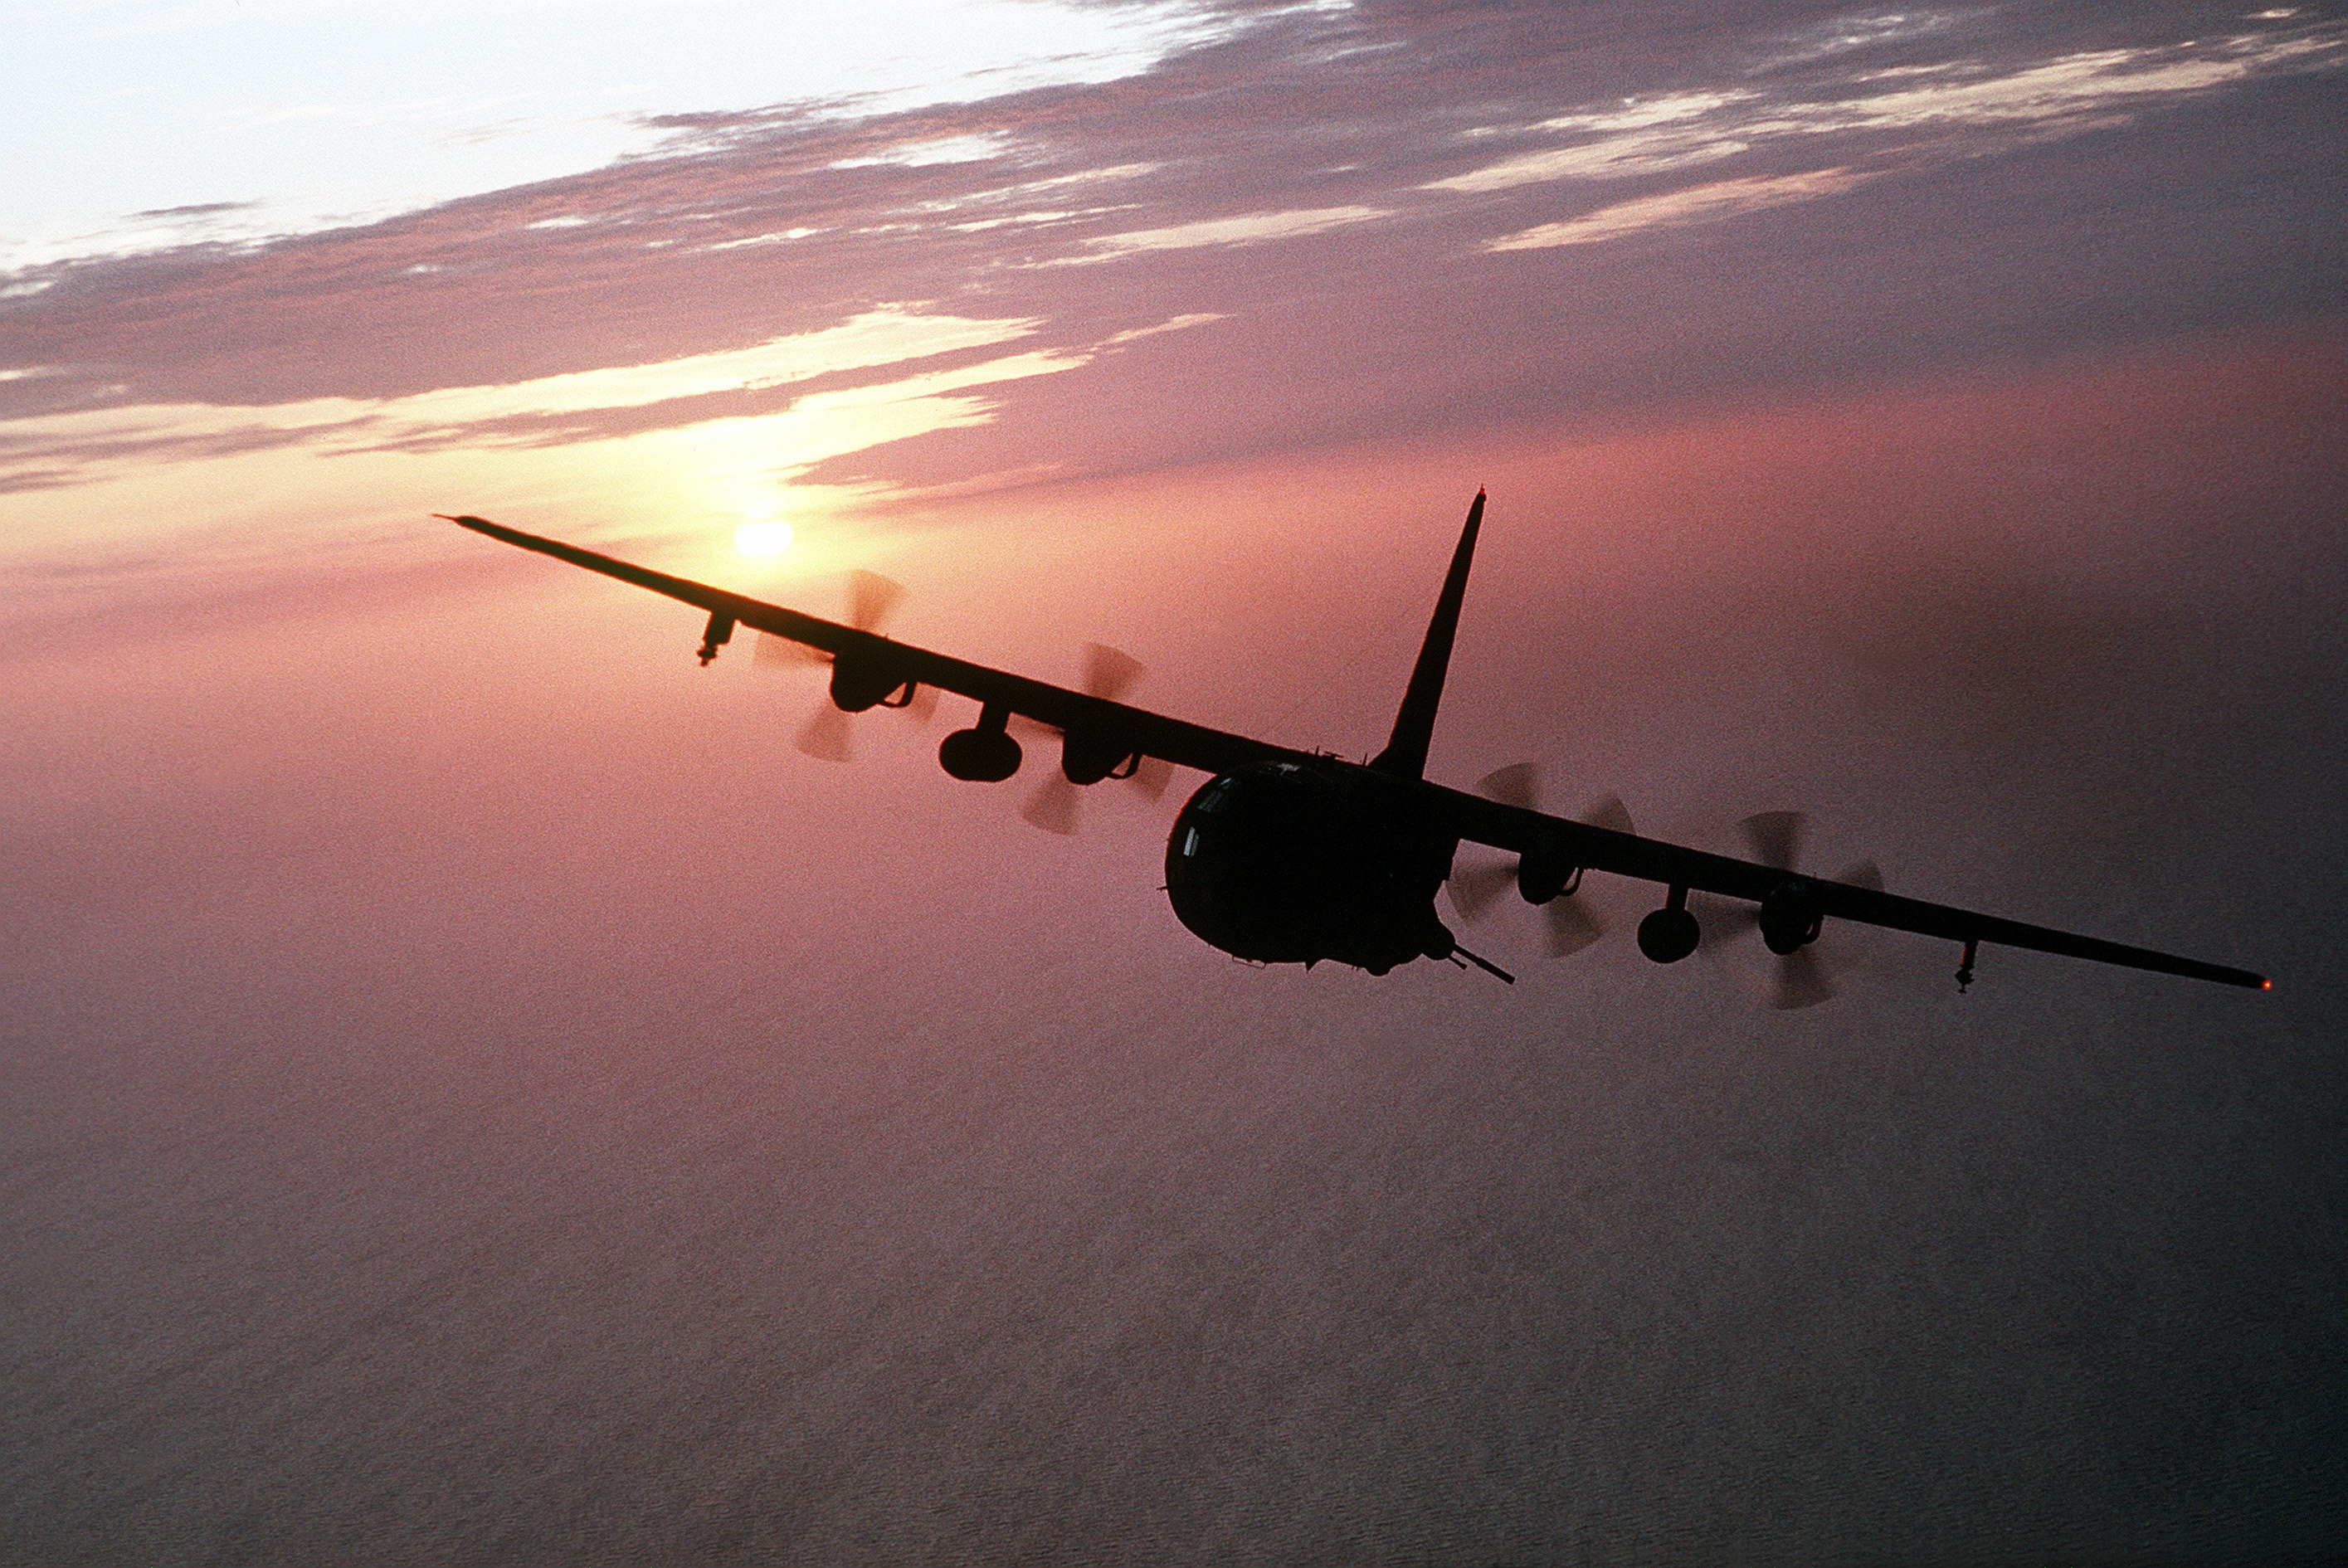 Ac-130 cargo plane in the air free image download